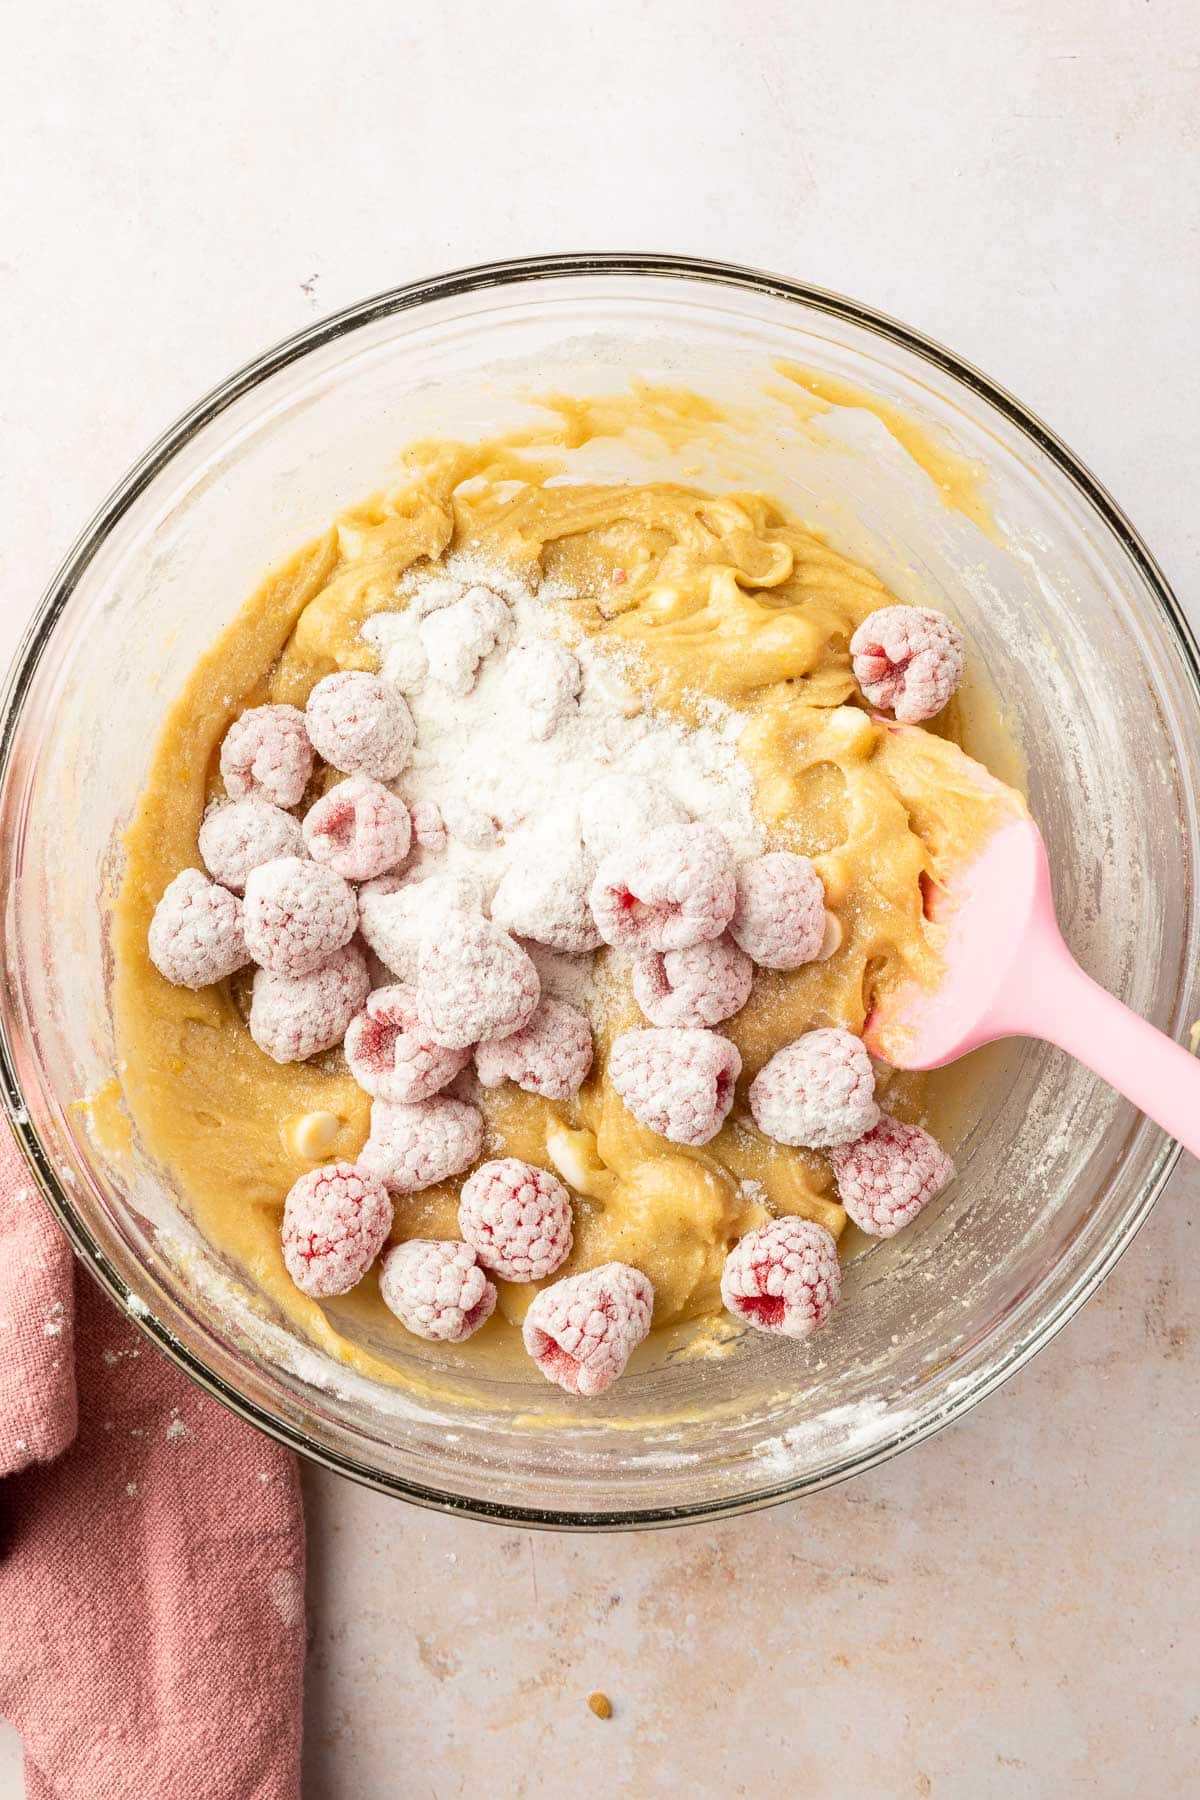 A glass mixing bowl with a gluten-free blondie batter topped with gluten-free flour and fresh raspberries.